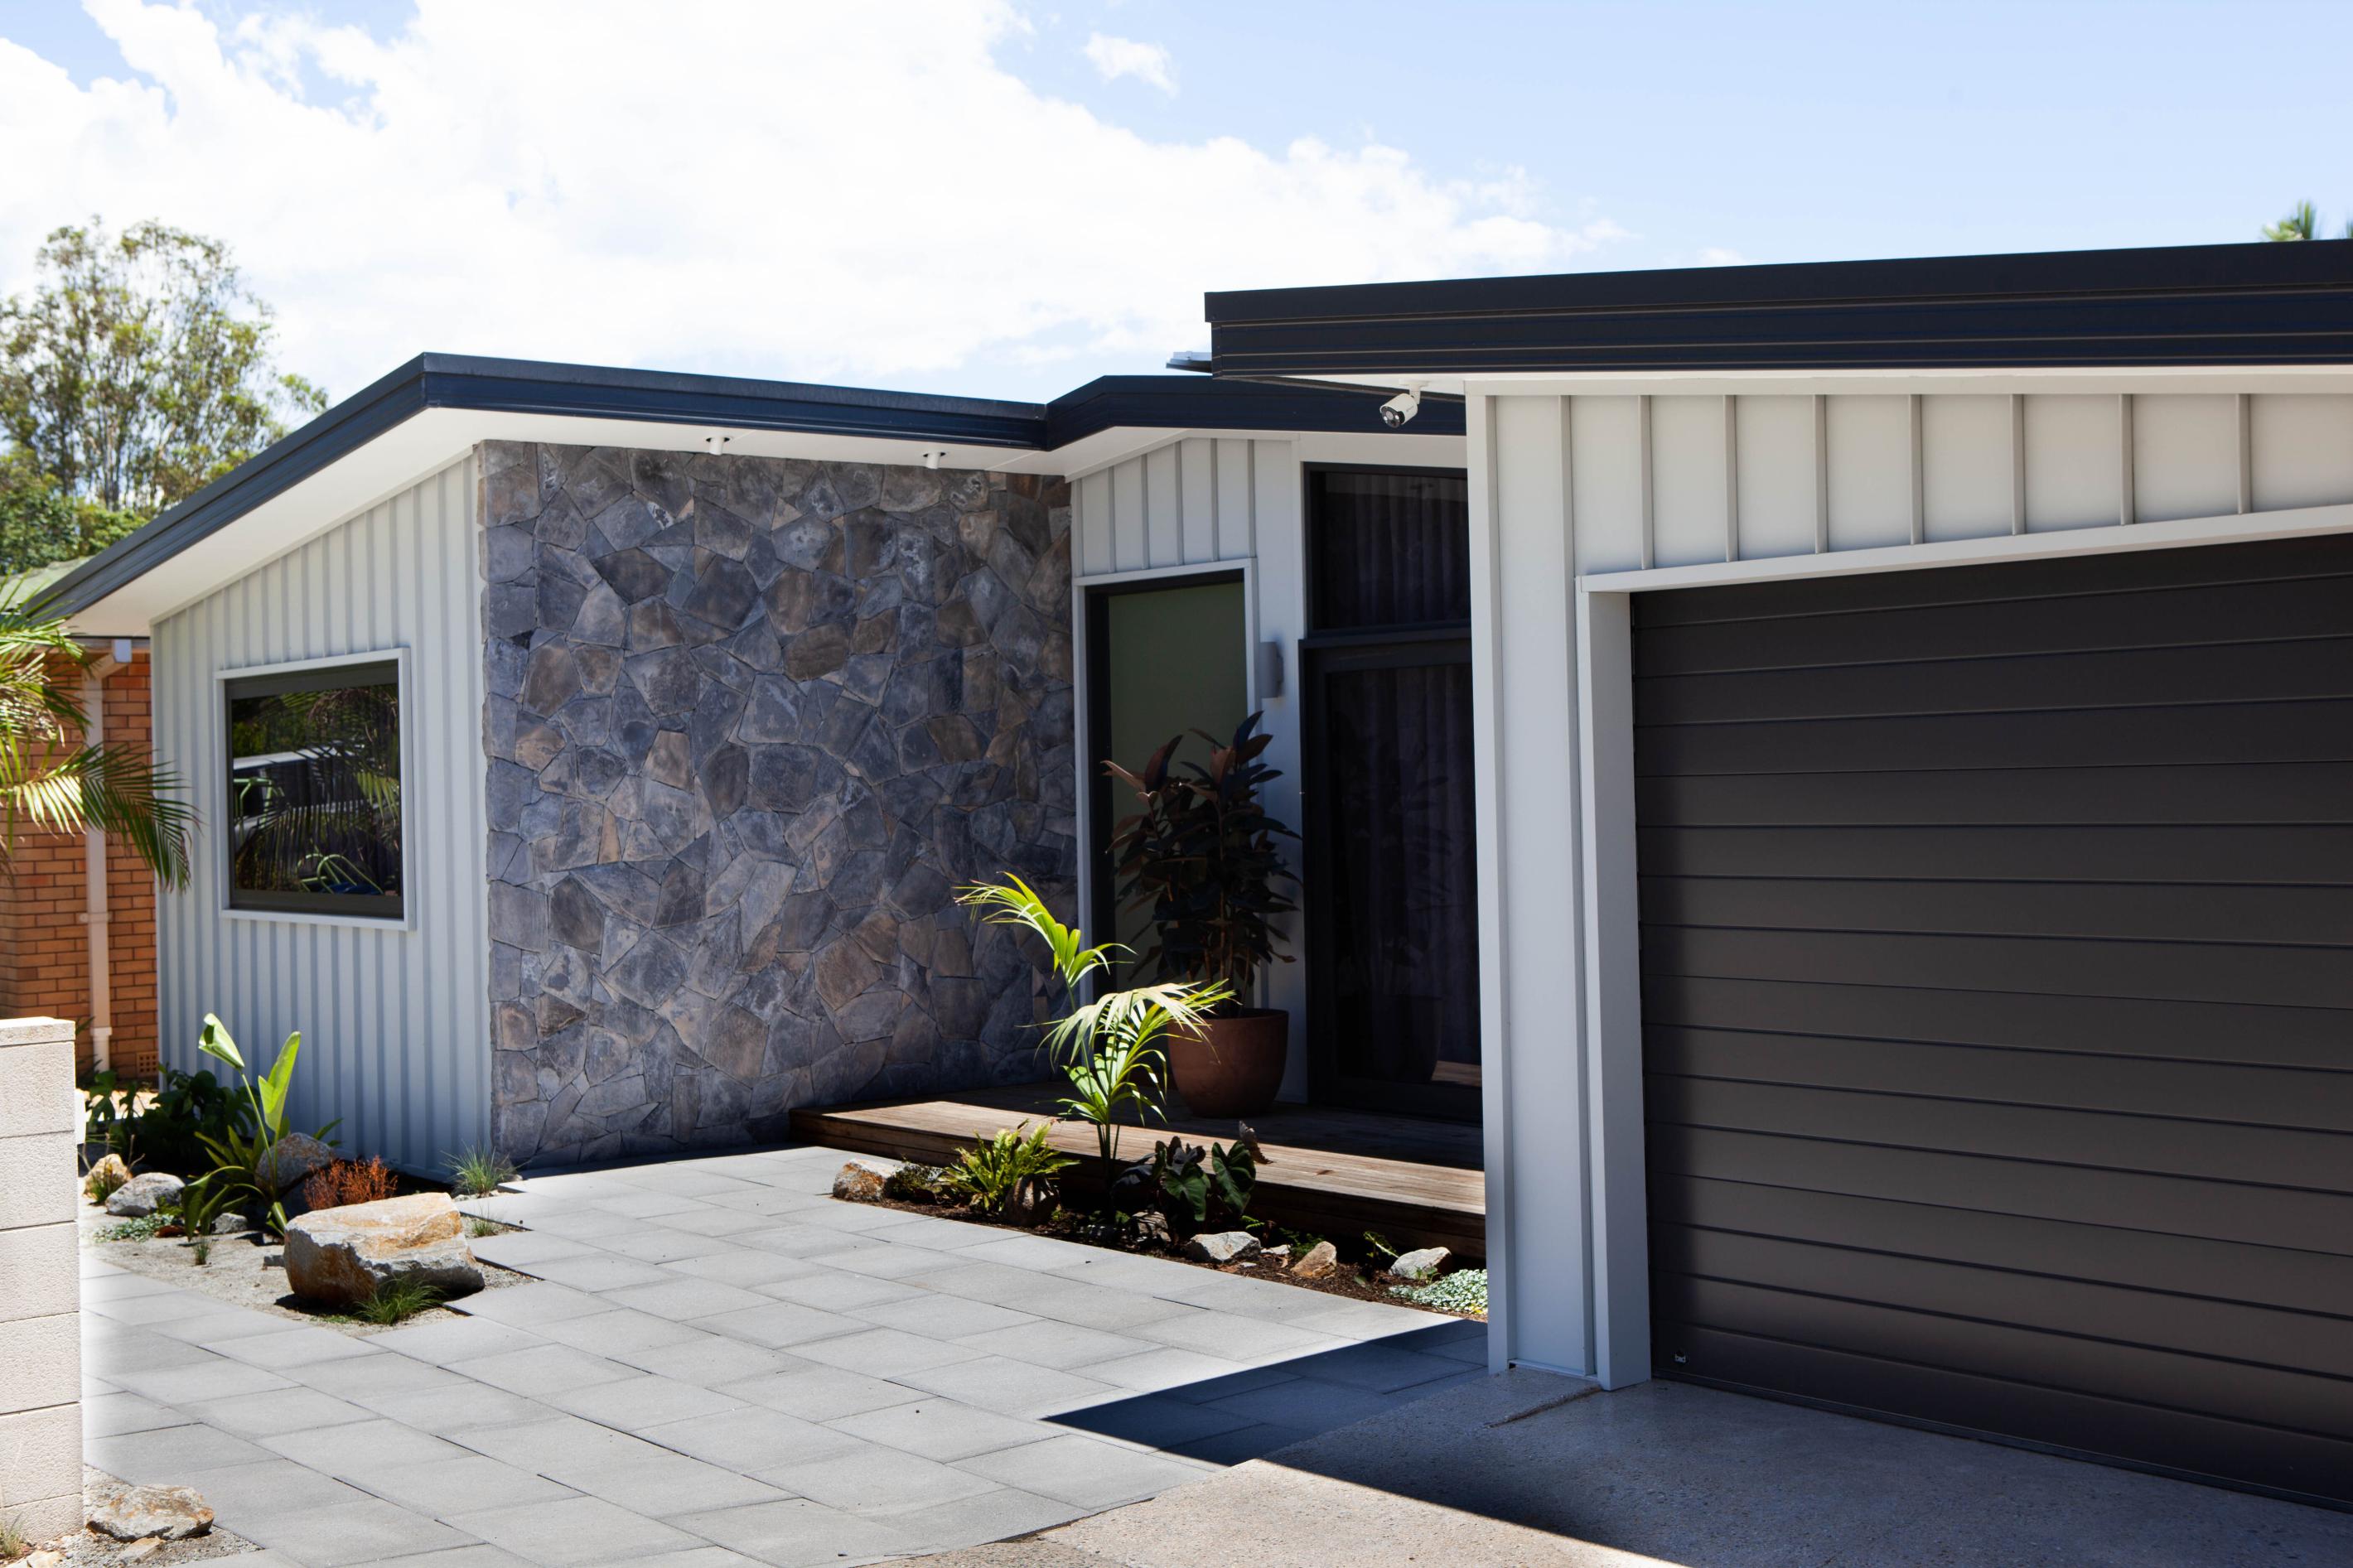 Simon and Ash Vos selected COLORBOND® steel Shale Grey™ in a Matt finish for their Palm Springs inspired home.